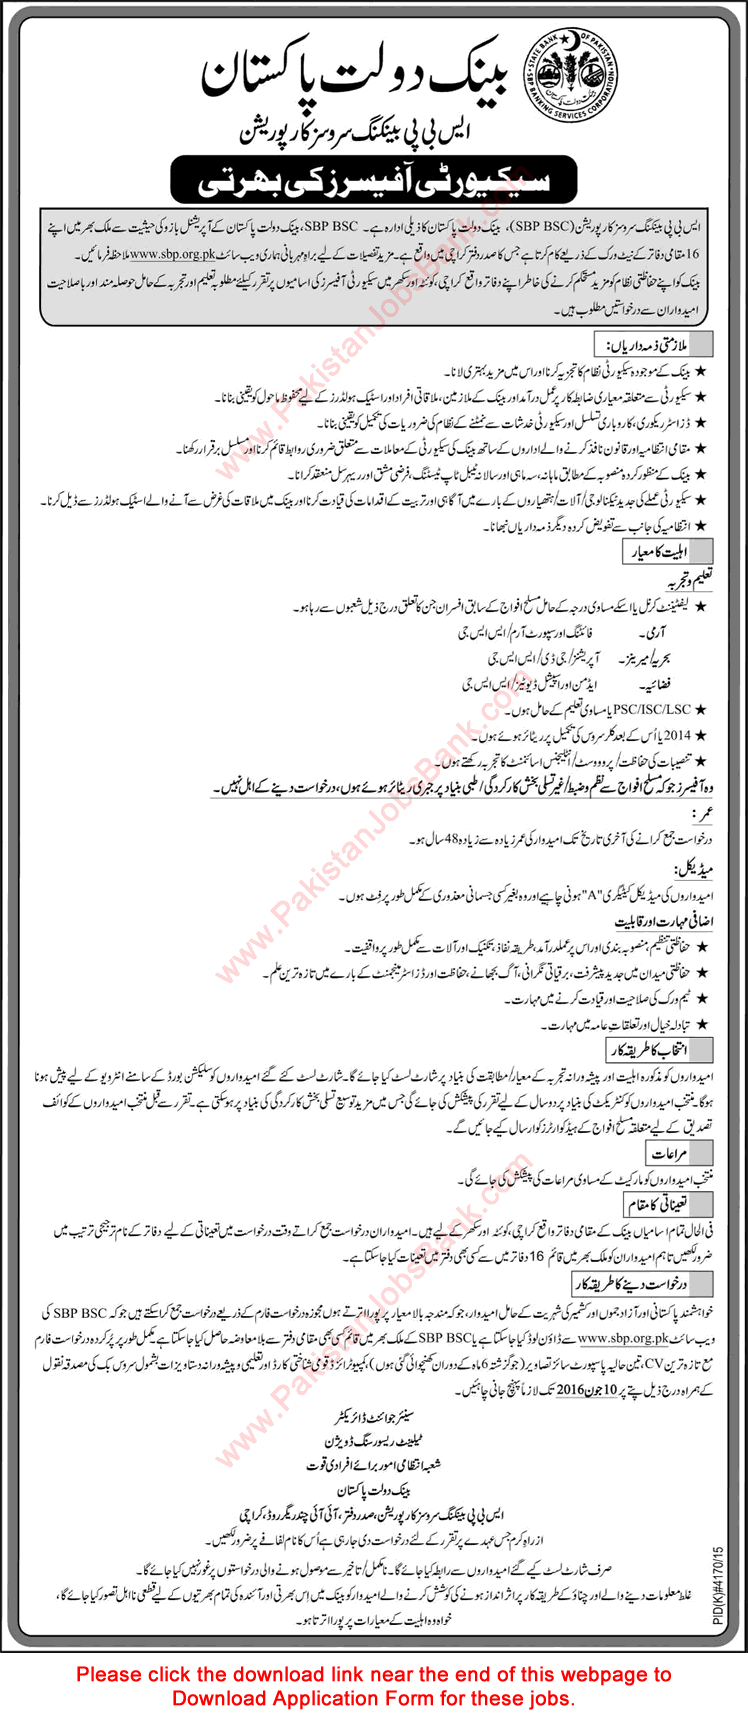 Security Officer Jobs in State Bank of Pakistan May 2016 Application Form Download SBP BSC Latest